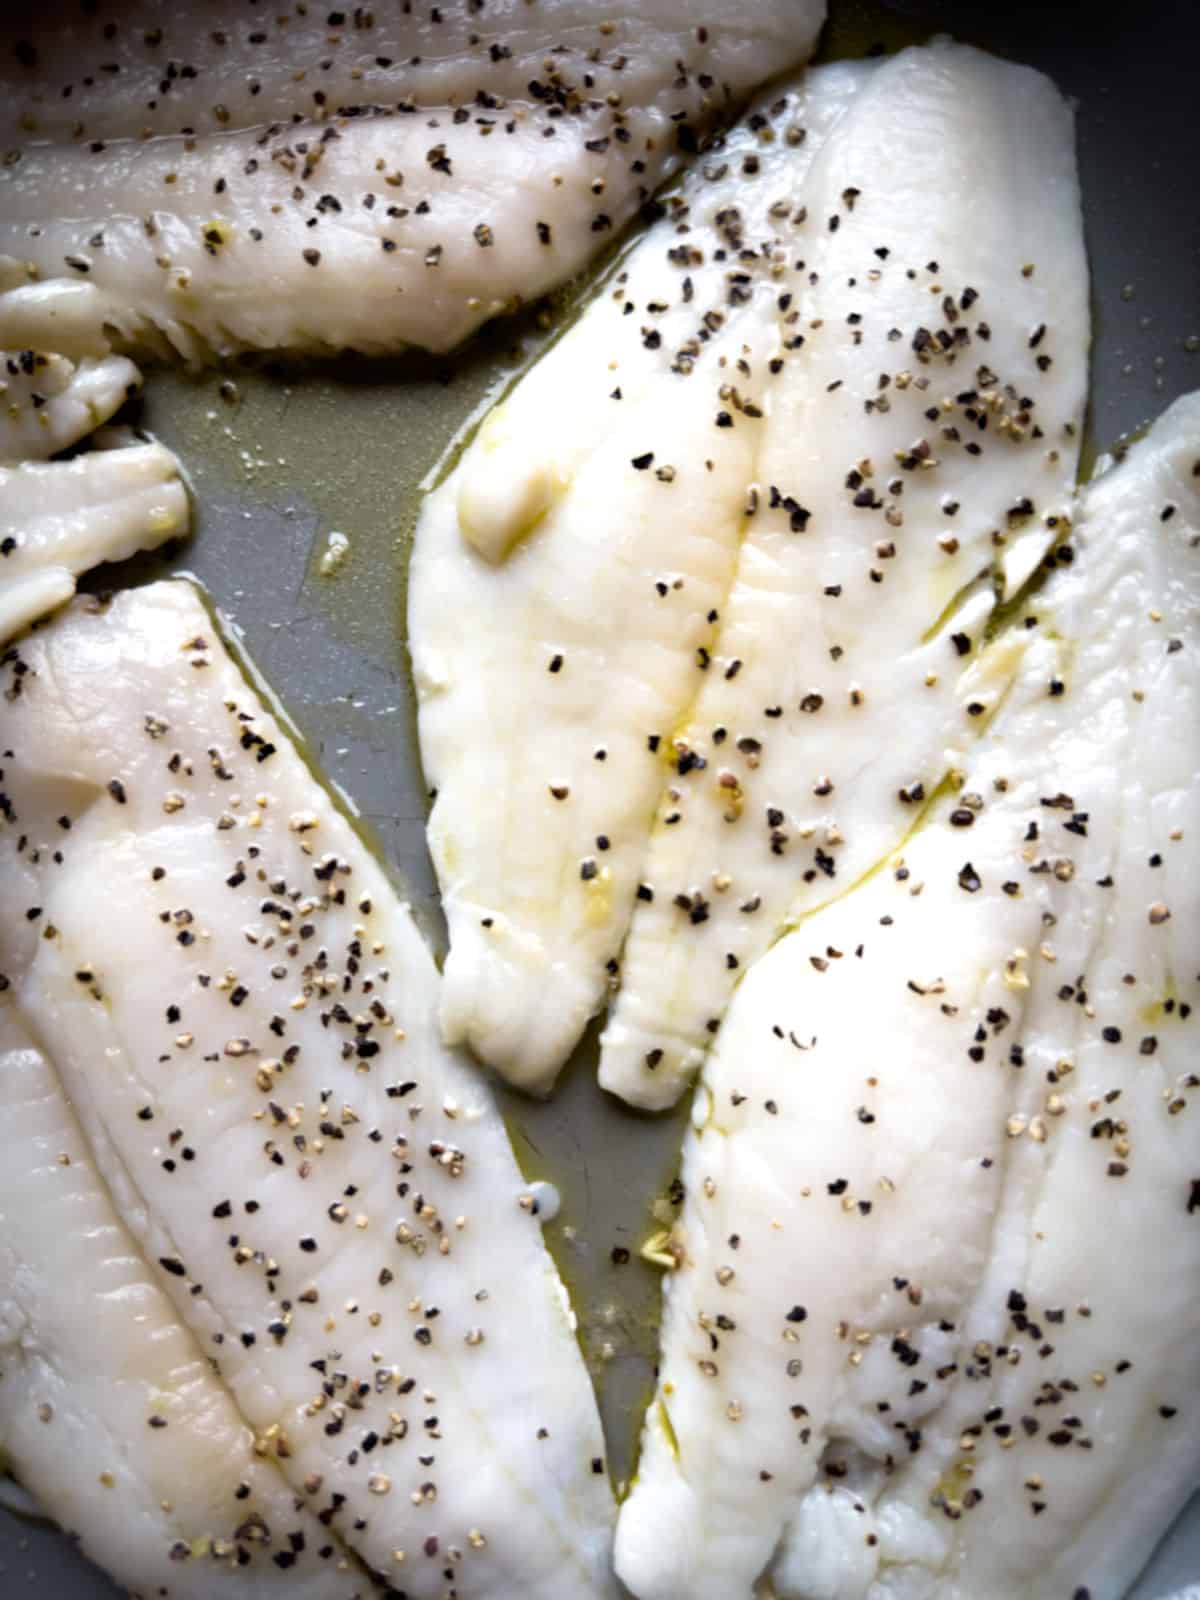 yellowtail flounder in butter sauce (ghee) seasoned with black pepper in a grey skillet, still raw